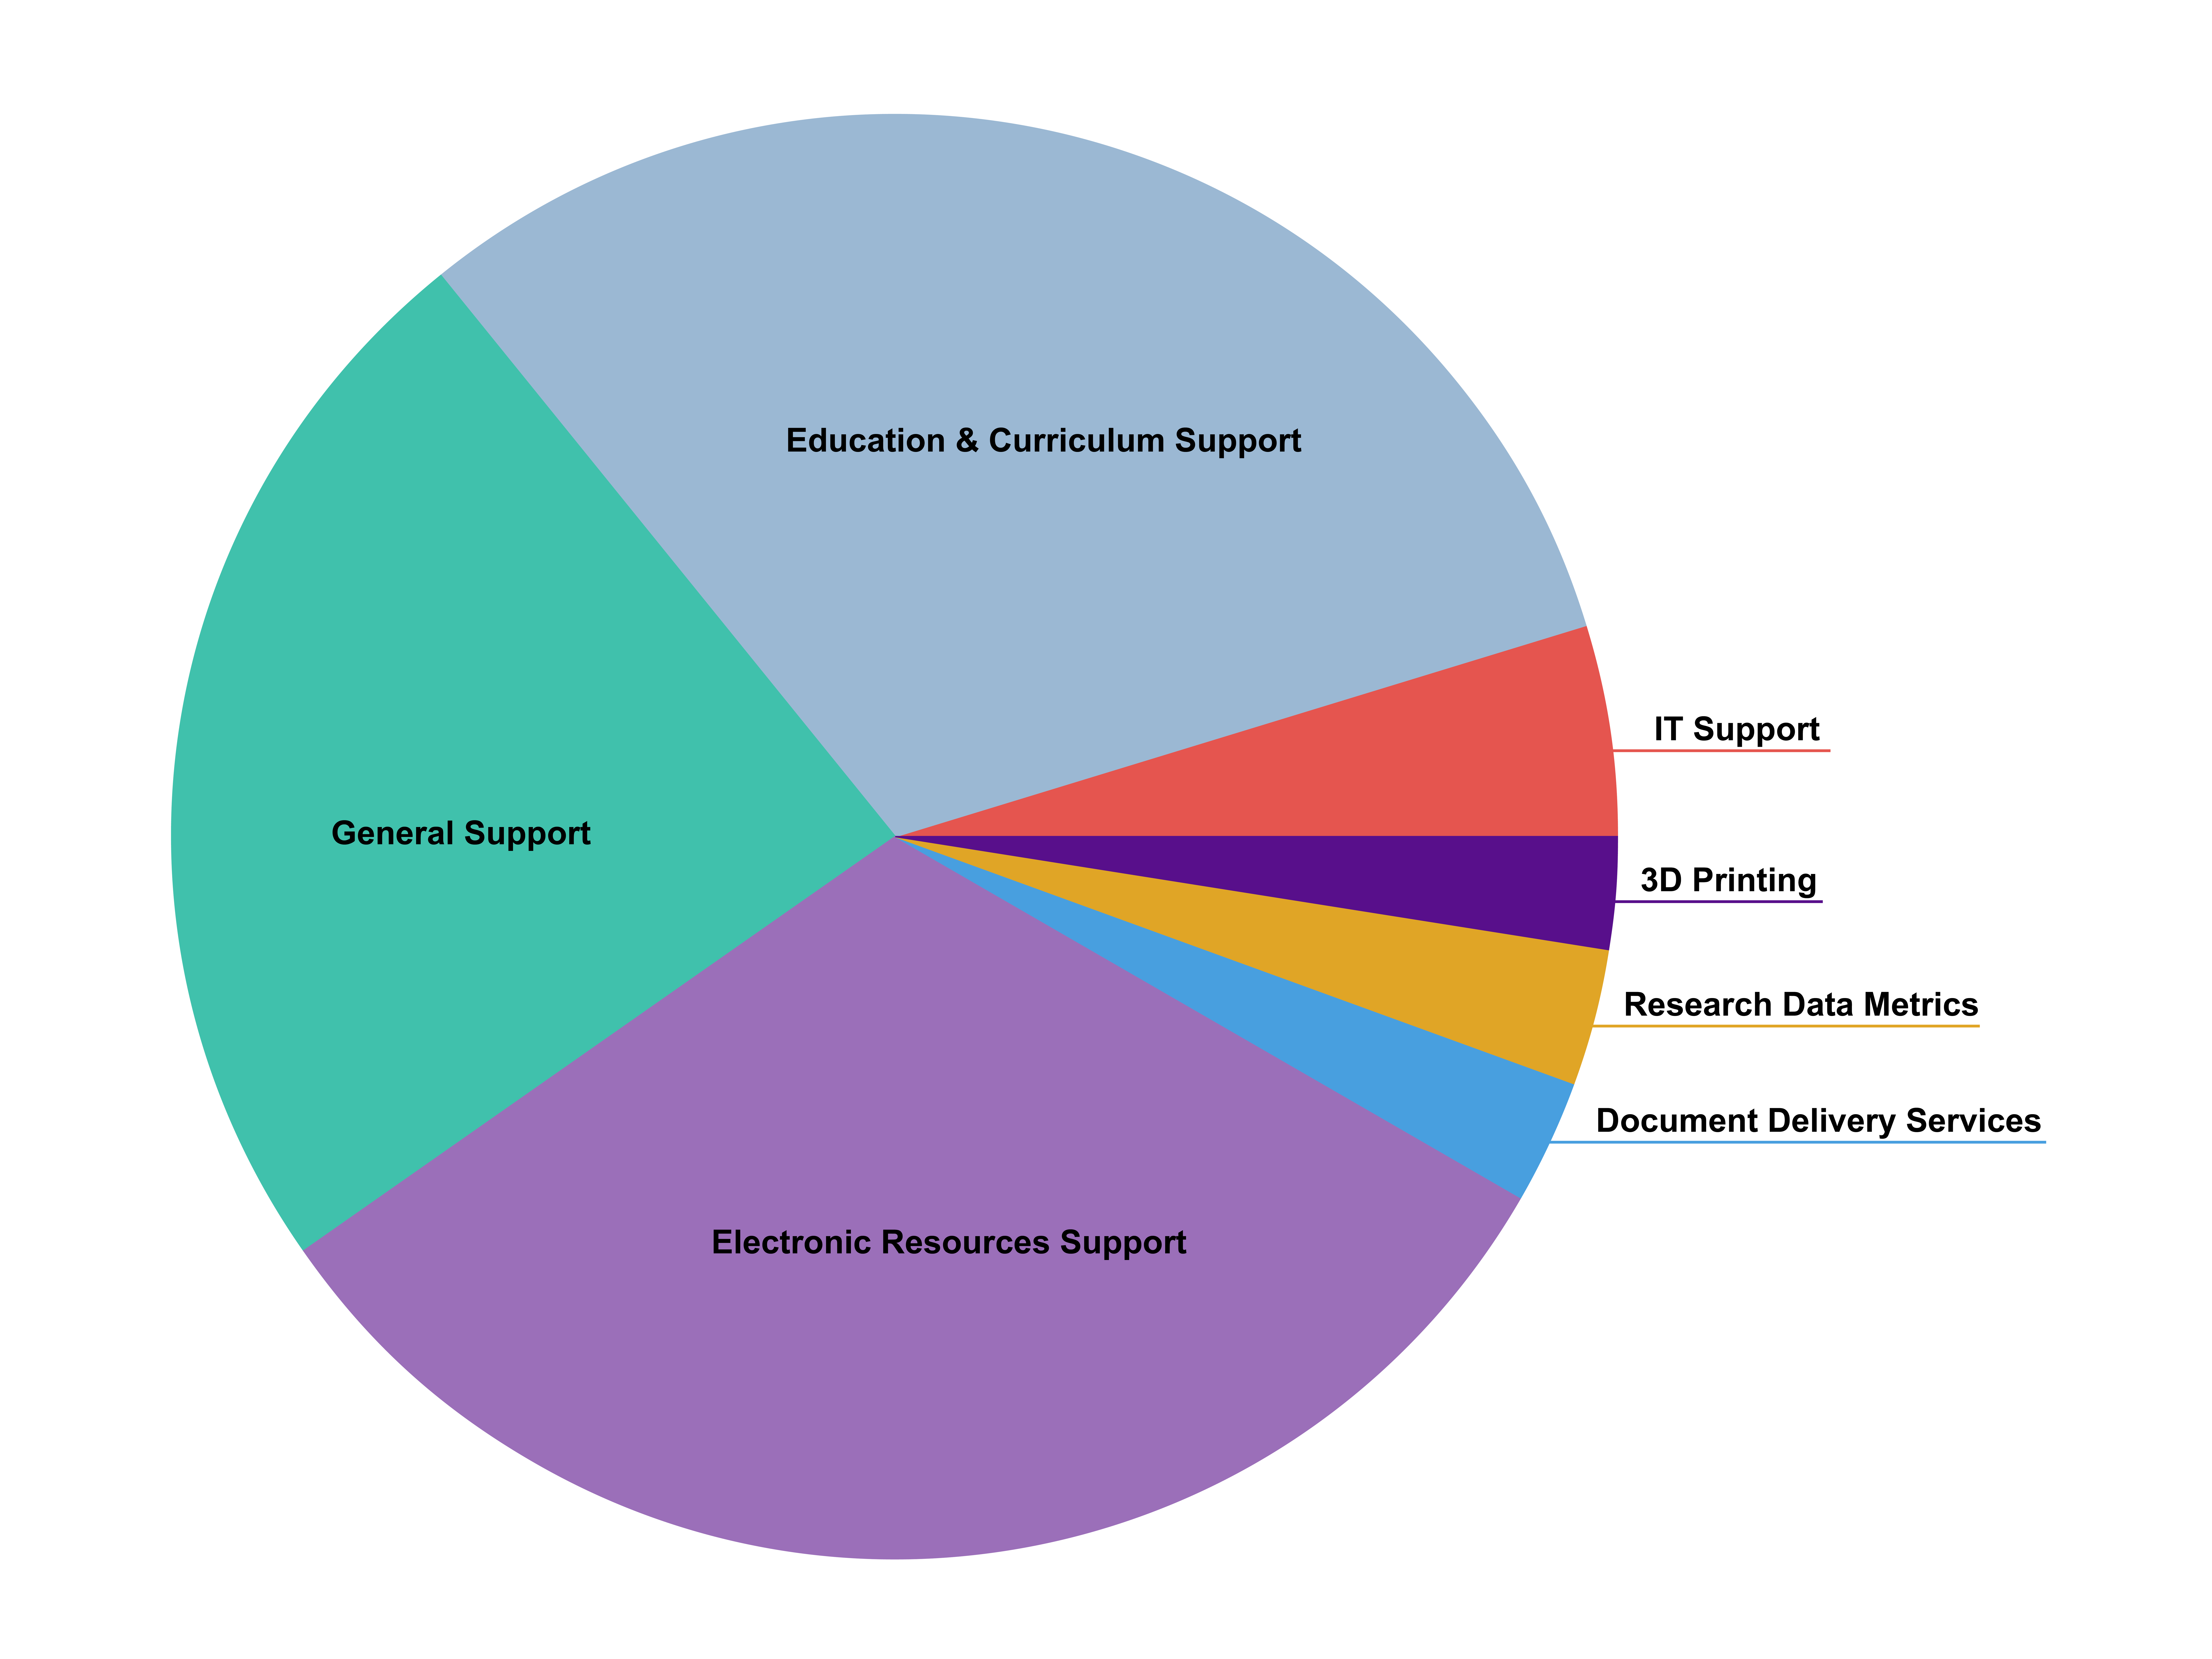 Chart showing allocations of support tickets per type of support